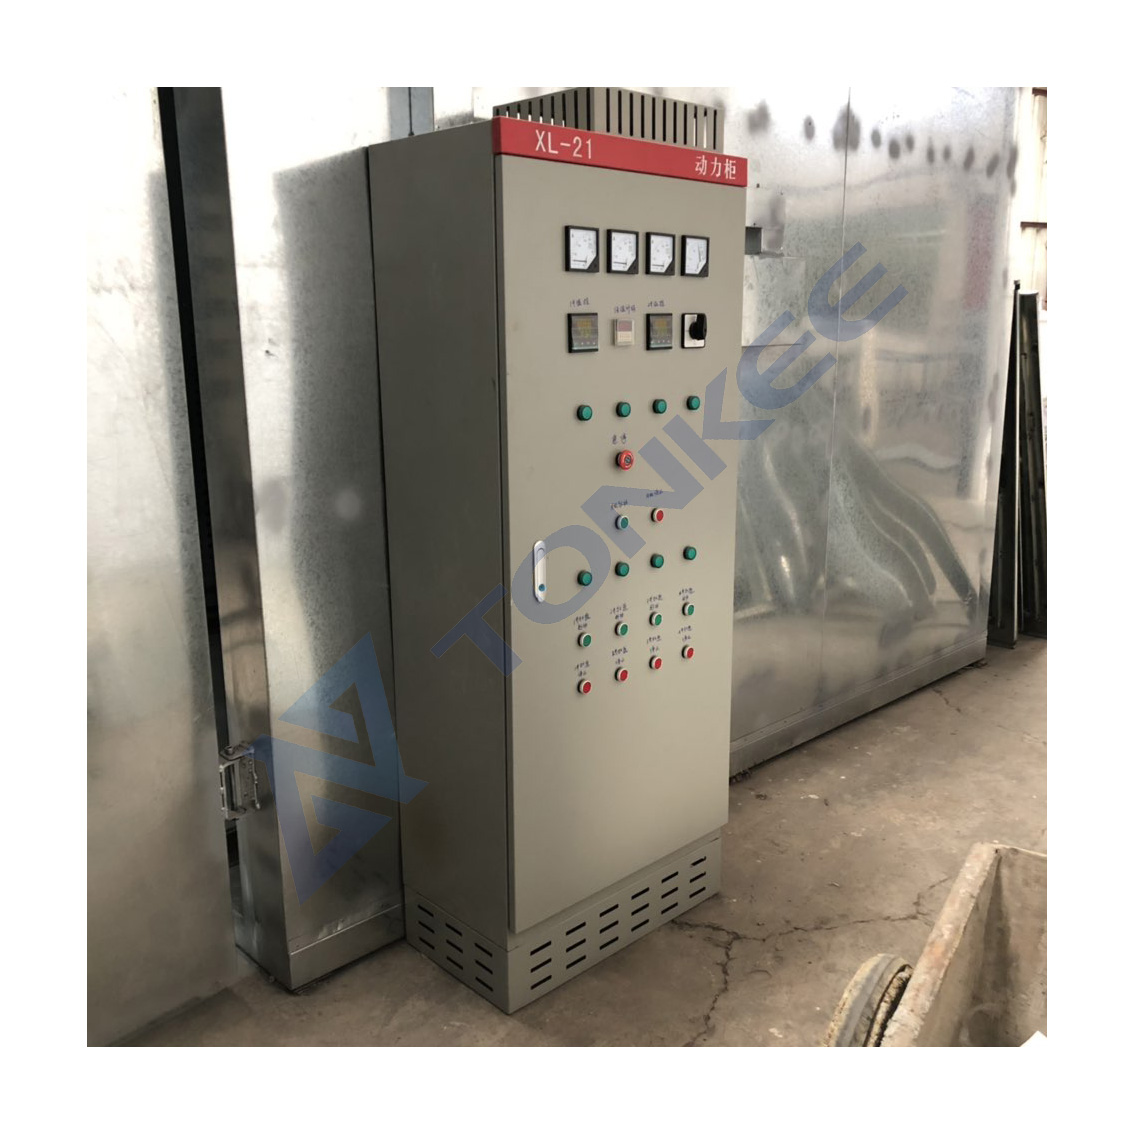 XL-21 Power Distribution Cabinet Electrical control switchboard panel board XL-21 Series 3 phase Low Voltage power Distribution switchgear Box with switch and wire